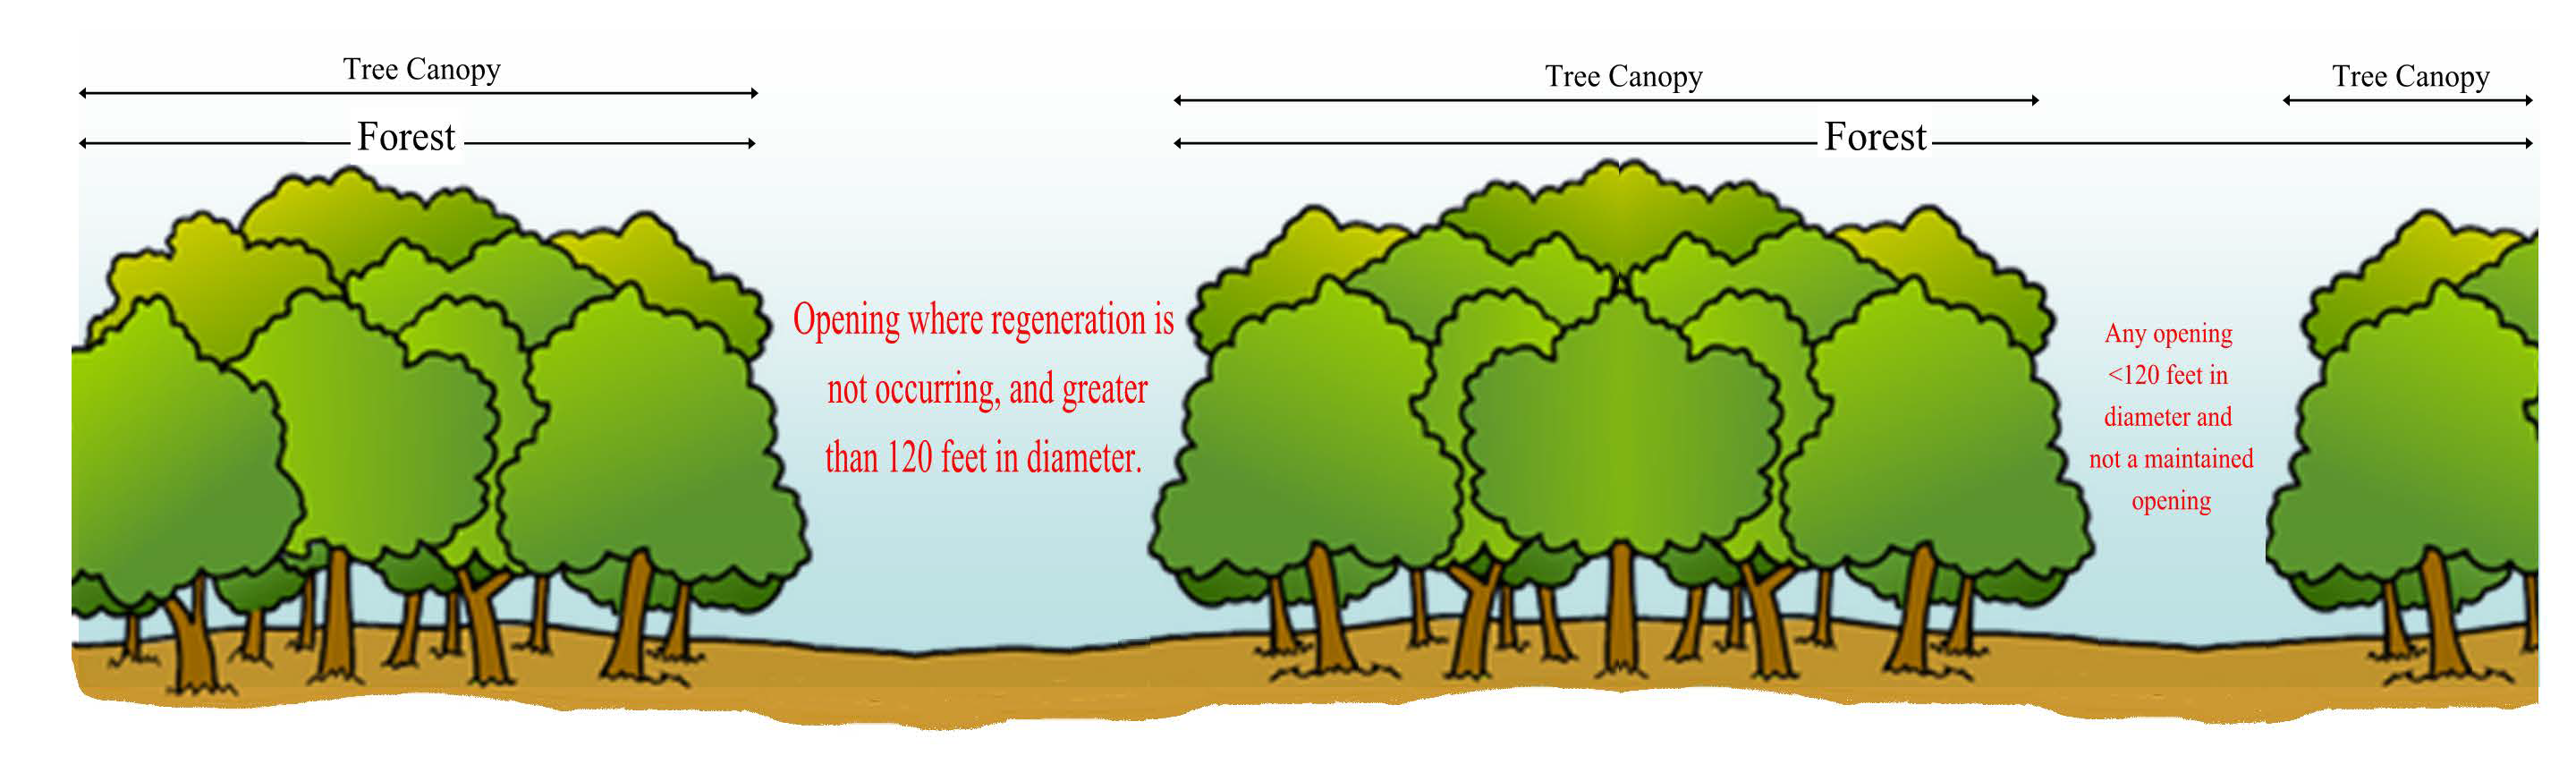 Forest-Tree-Image4.png